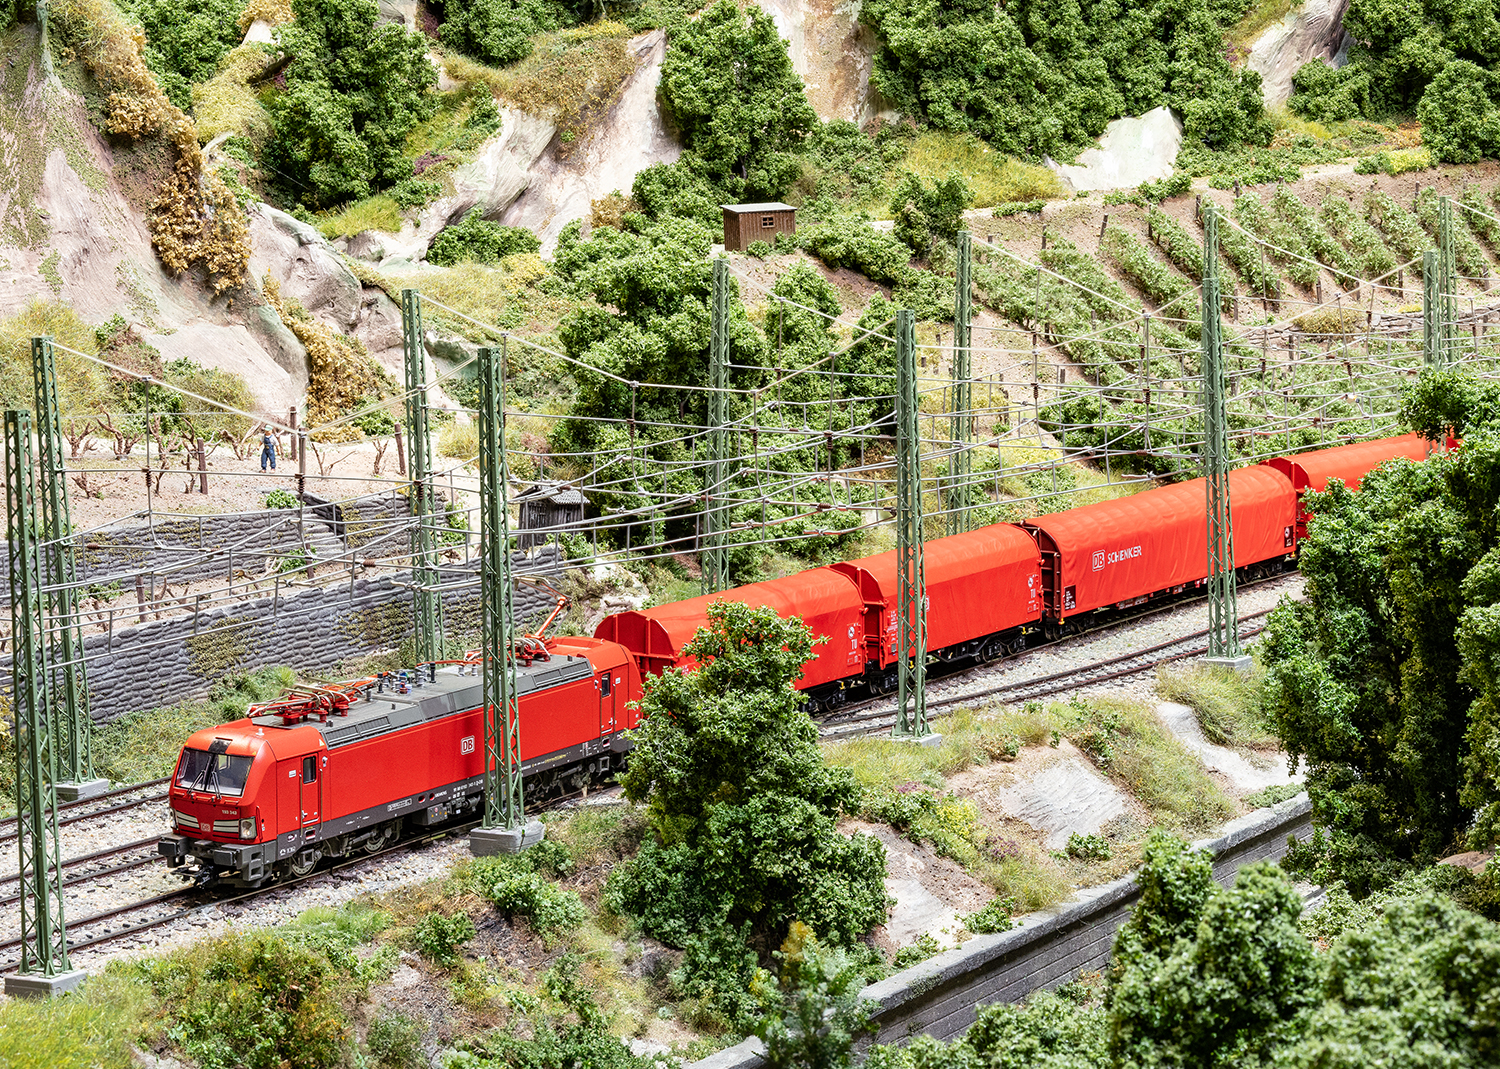 39330 - "The Traffic Red Cargo Dream"